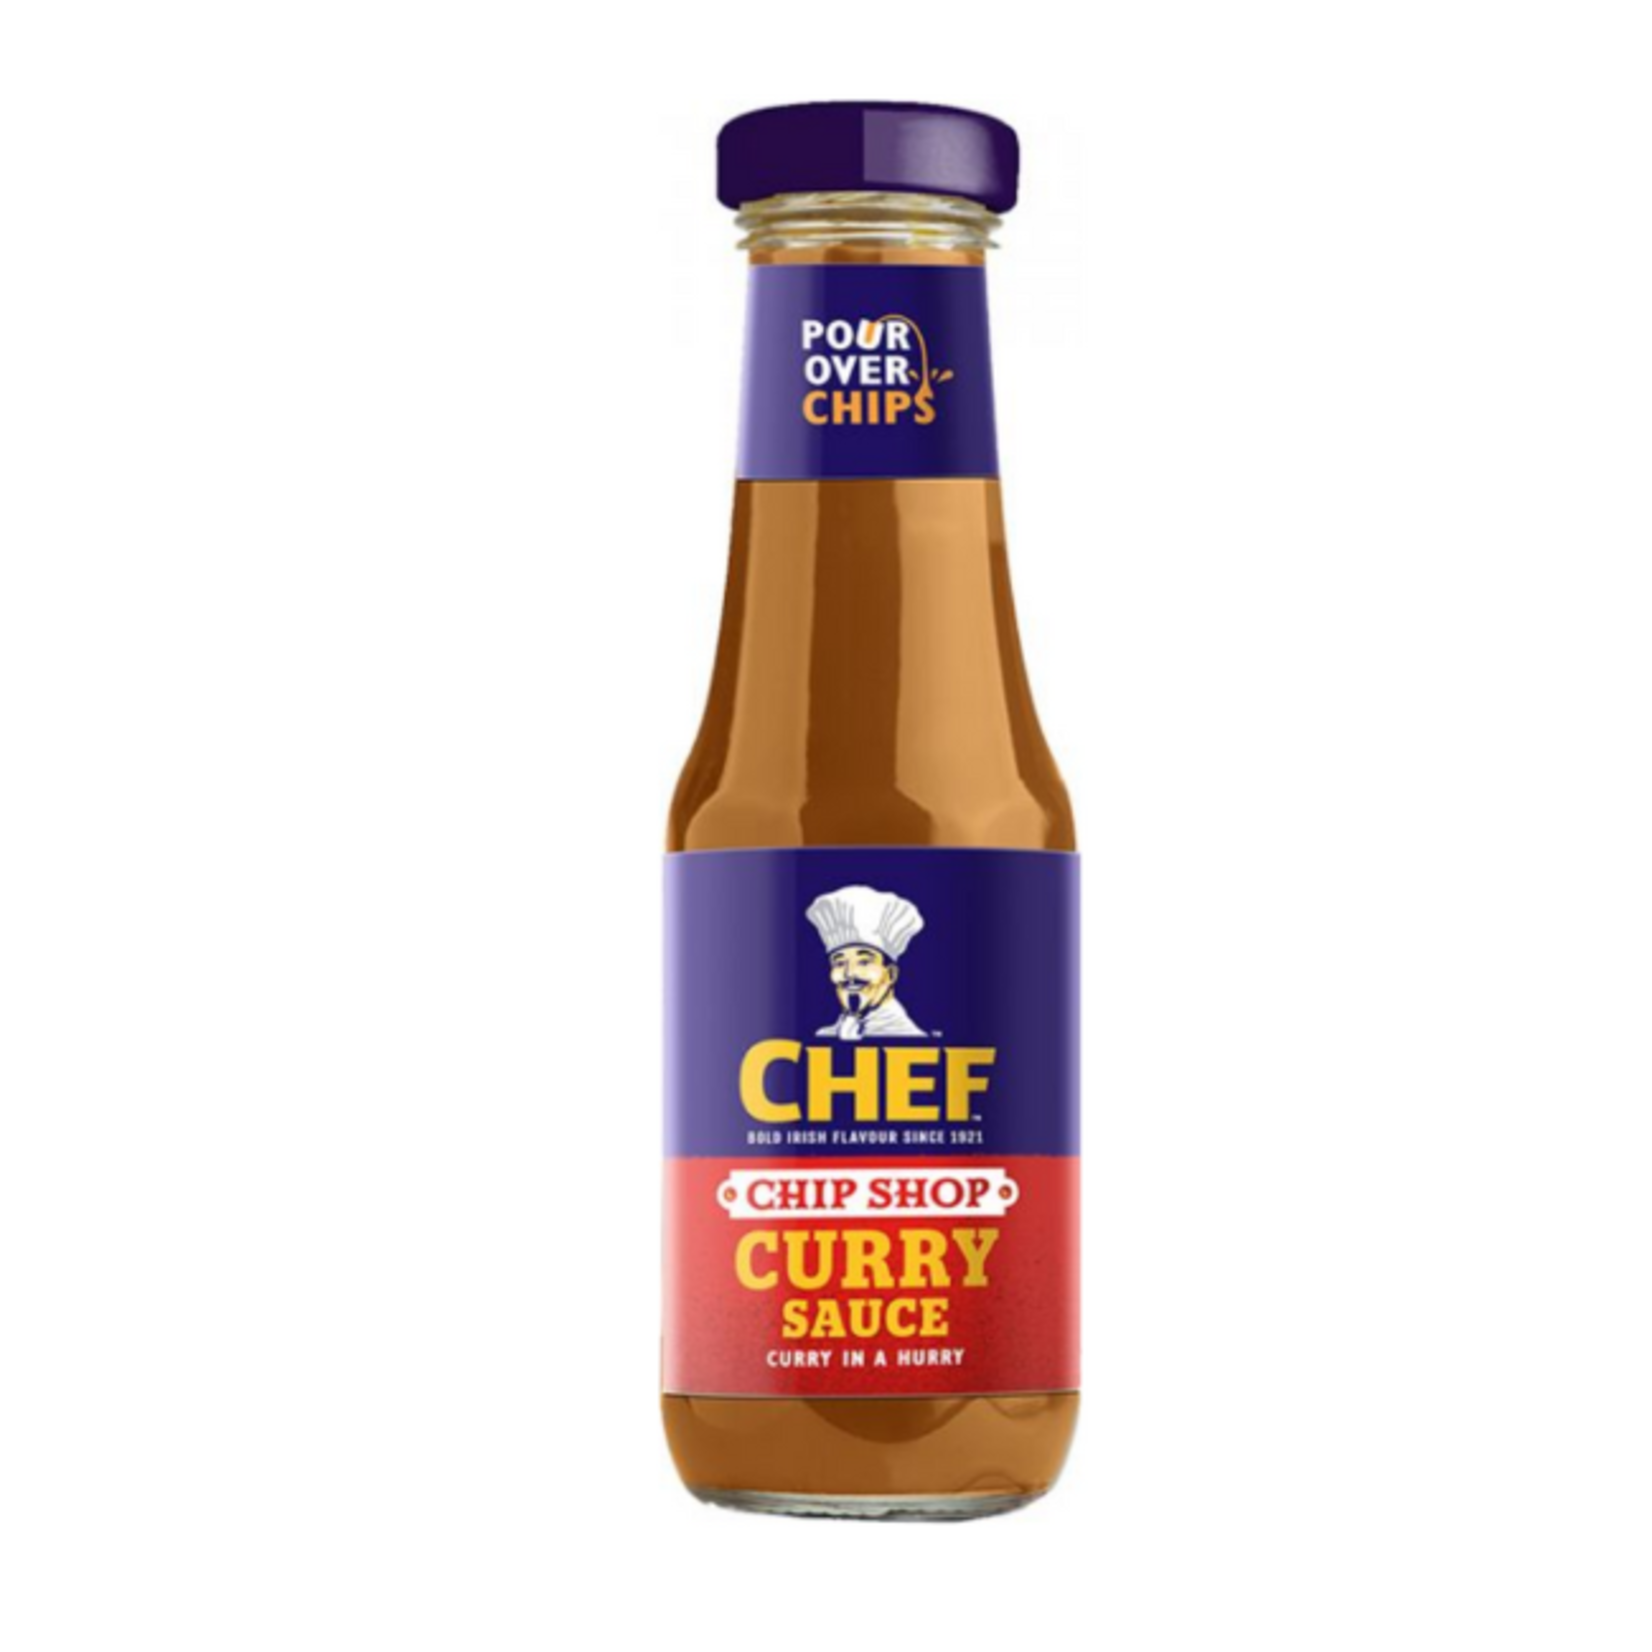 Chef Chef Chip Shop Curry Sauce 325g (11.5oz)